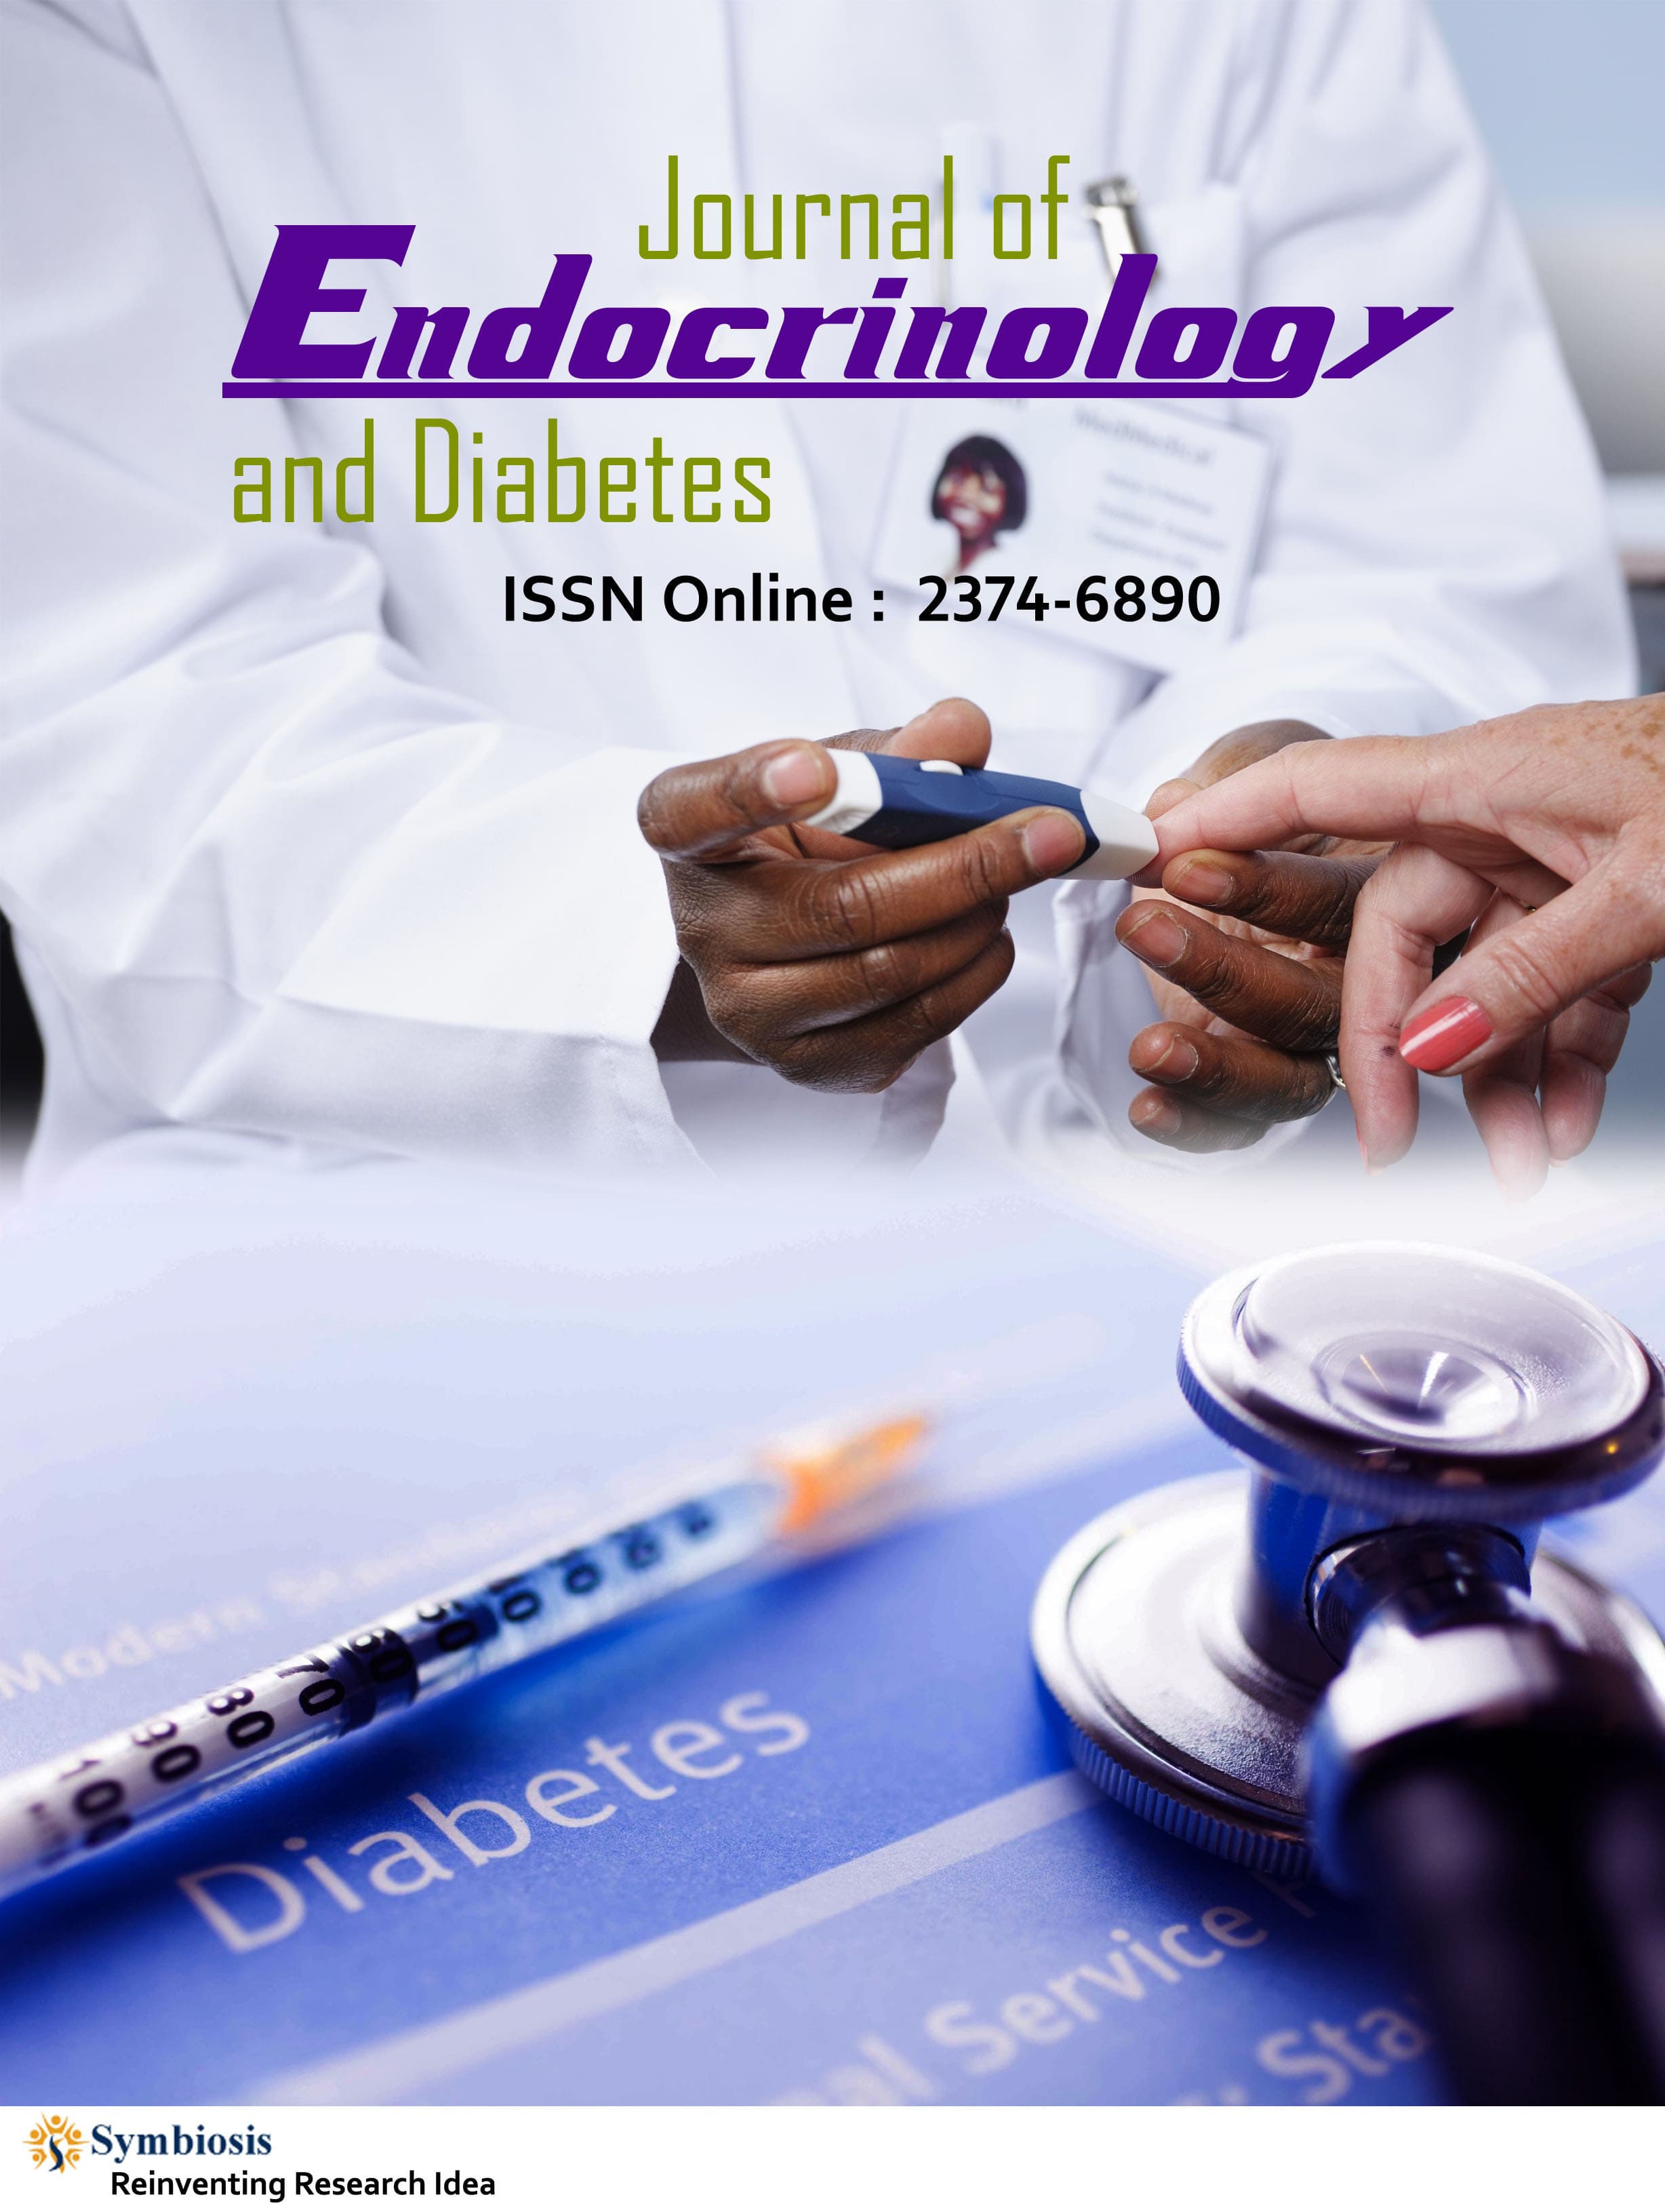 Journal of Endocrinology and Diabetes